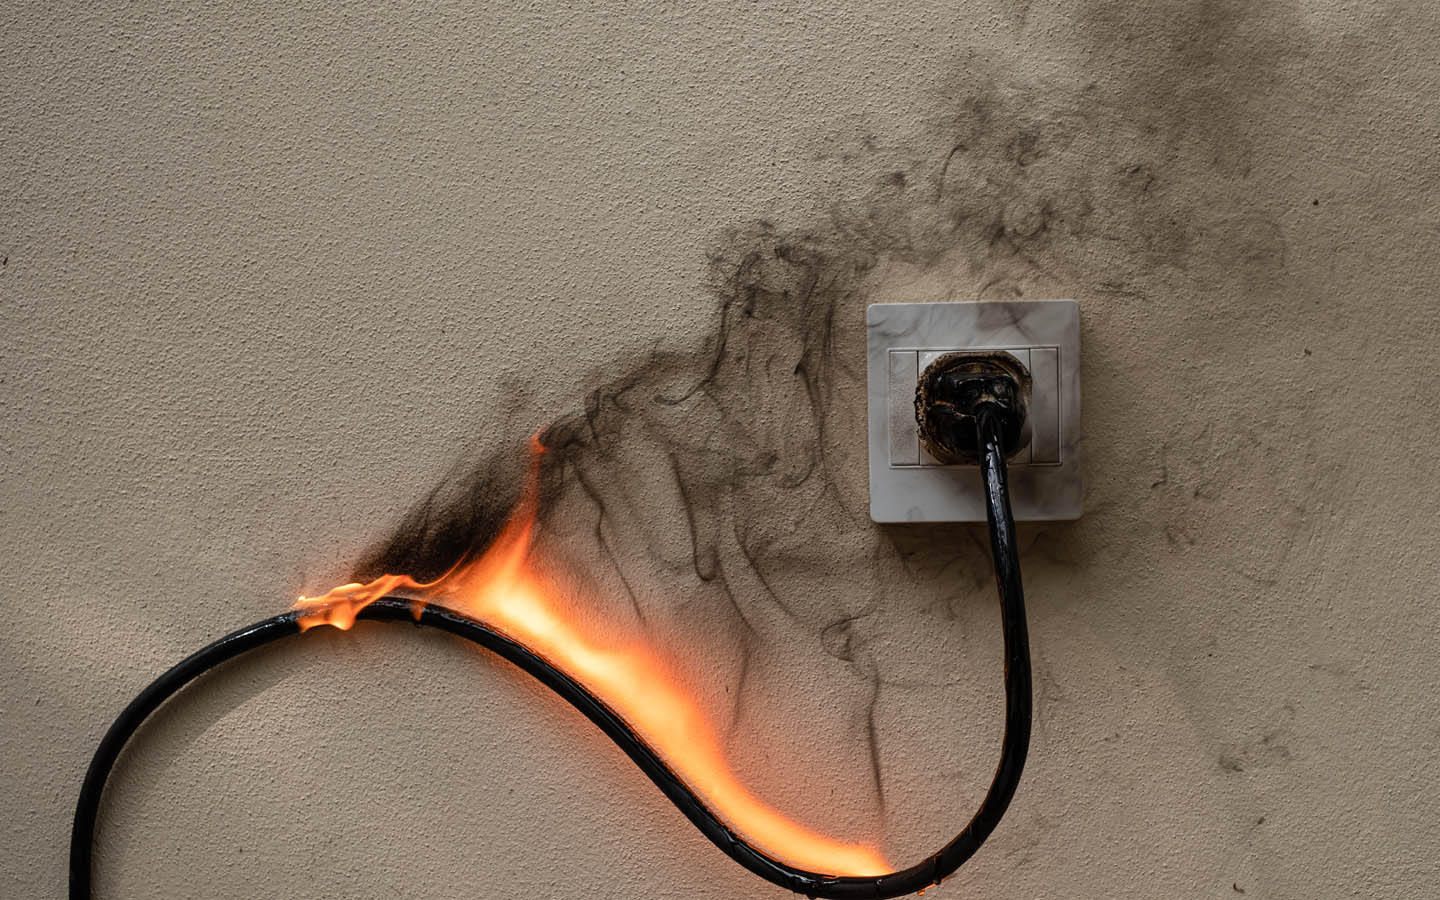 signs of electrical problems in home: burnt outlet